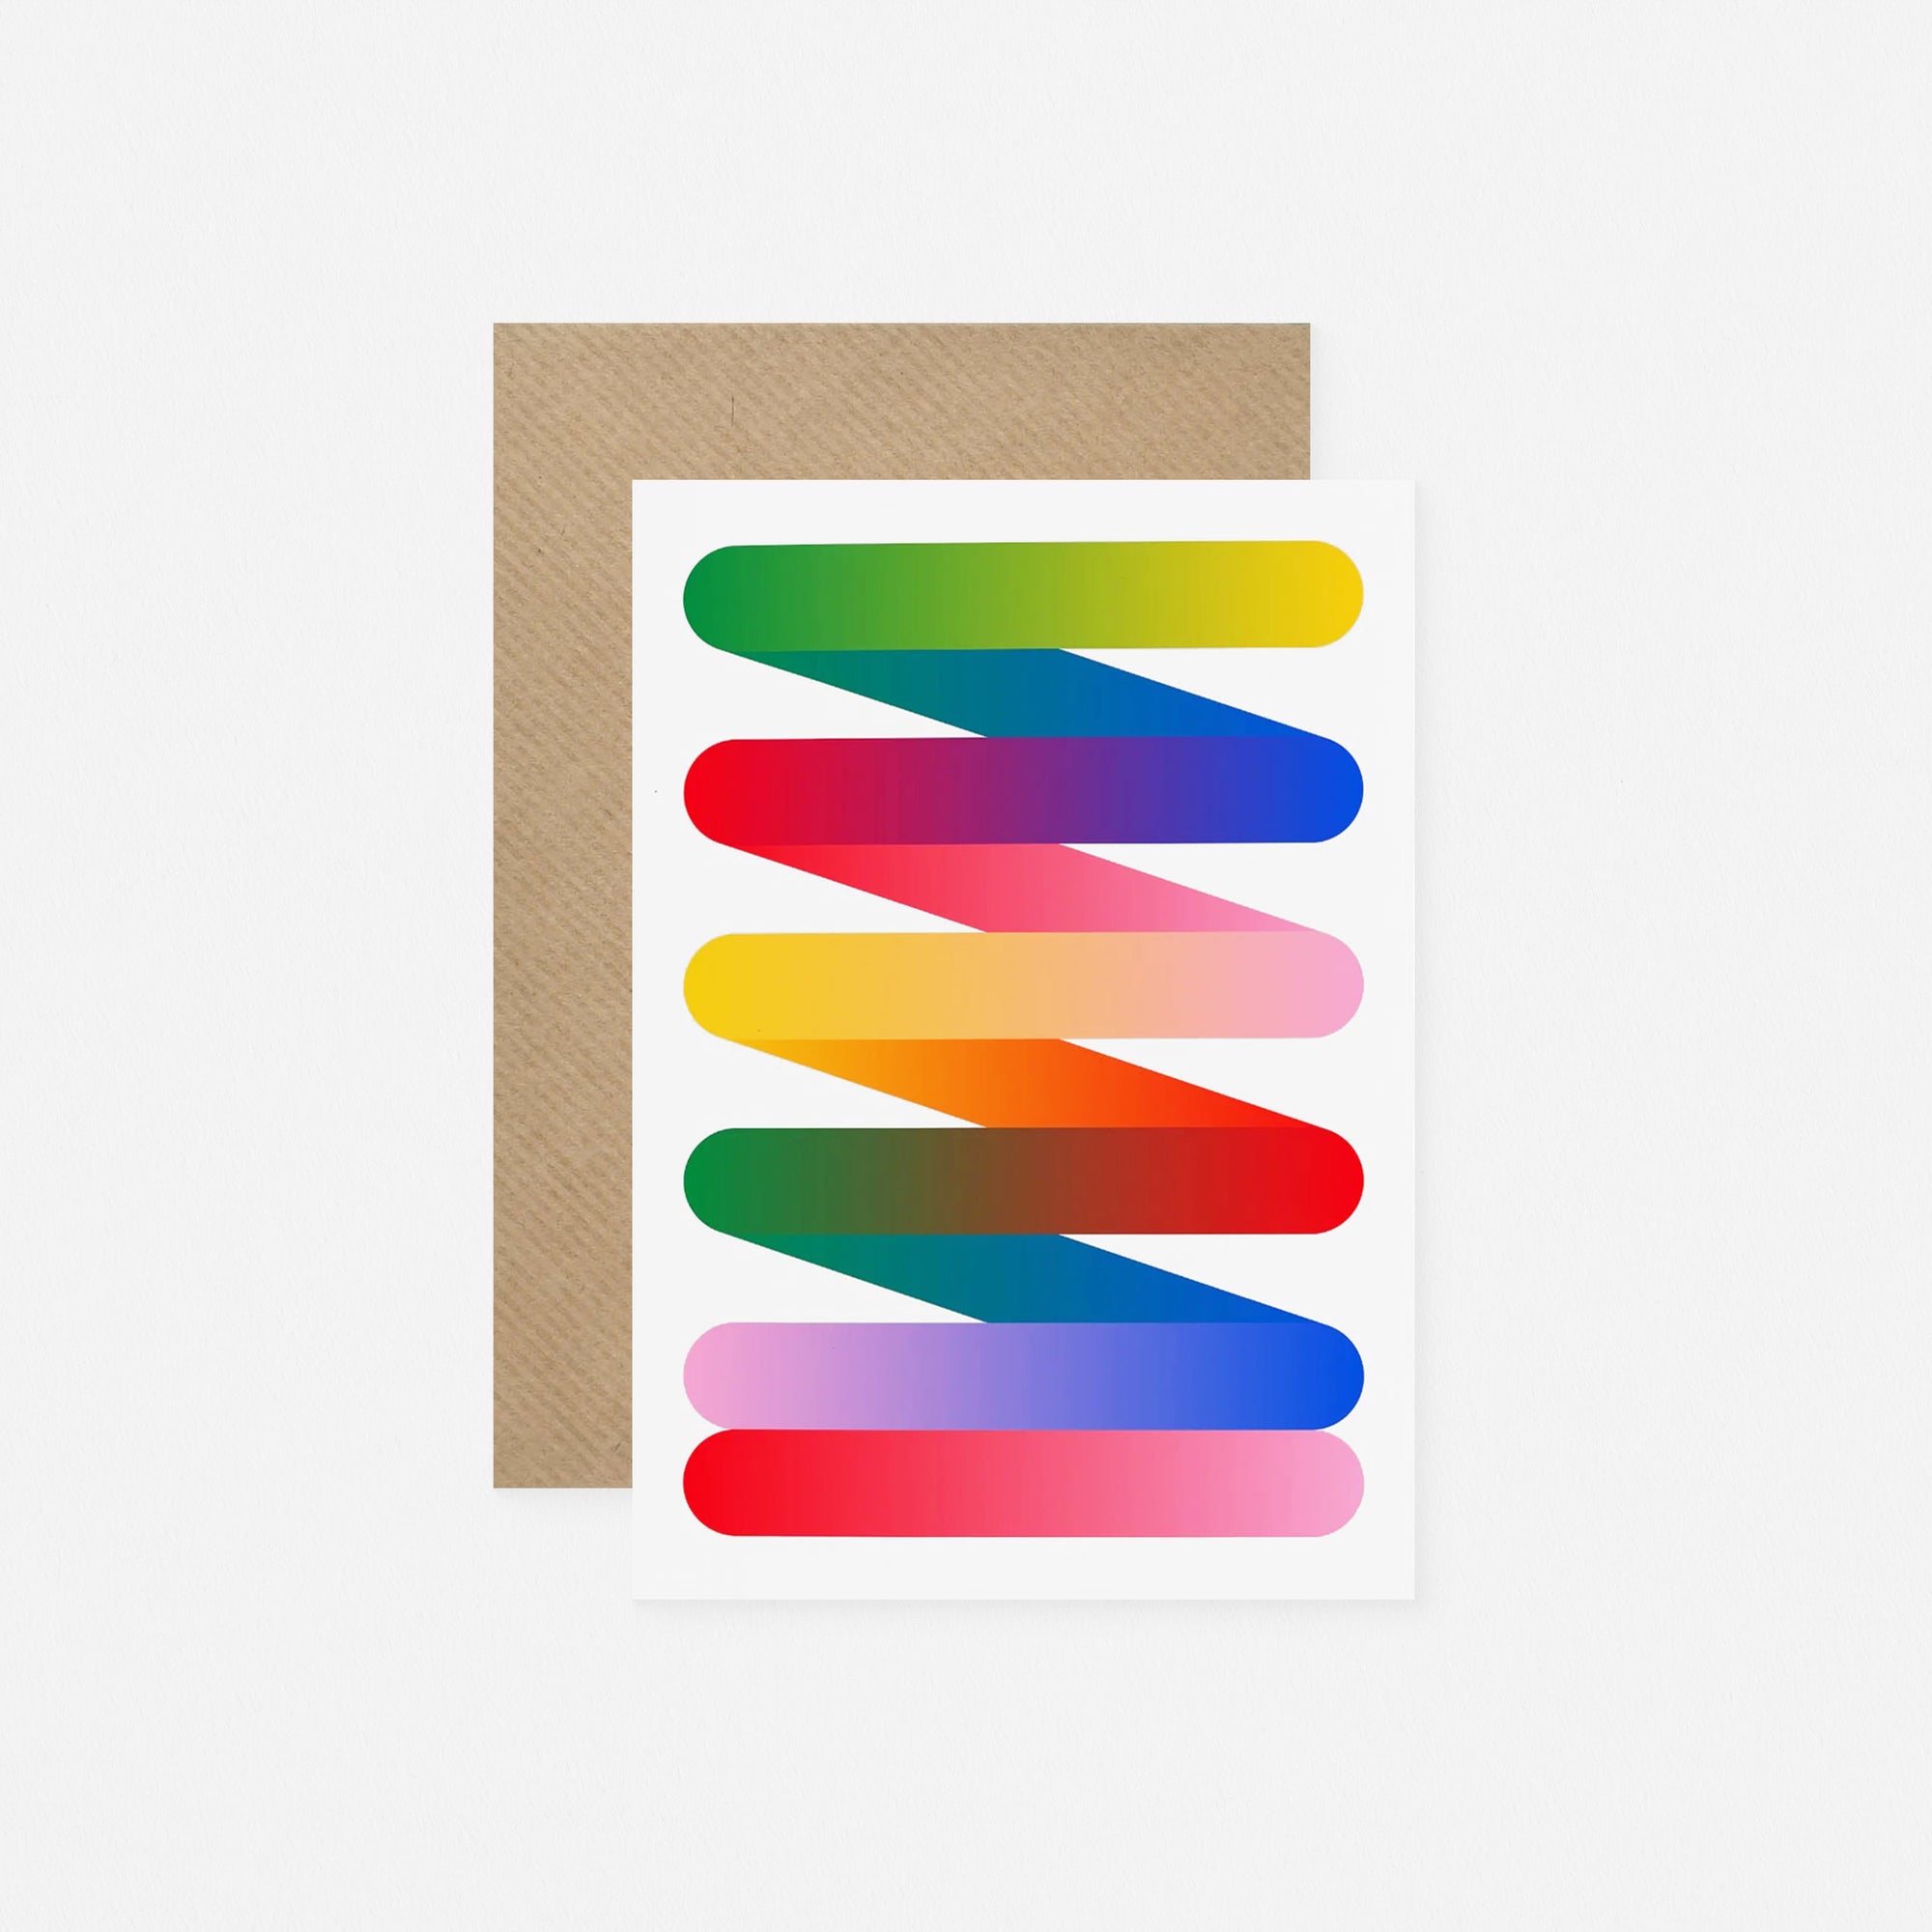 Evermade Suspension Greeting Card 